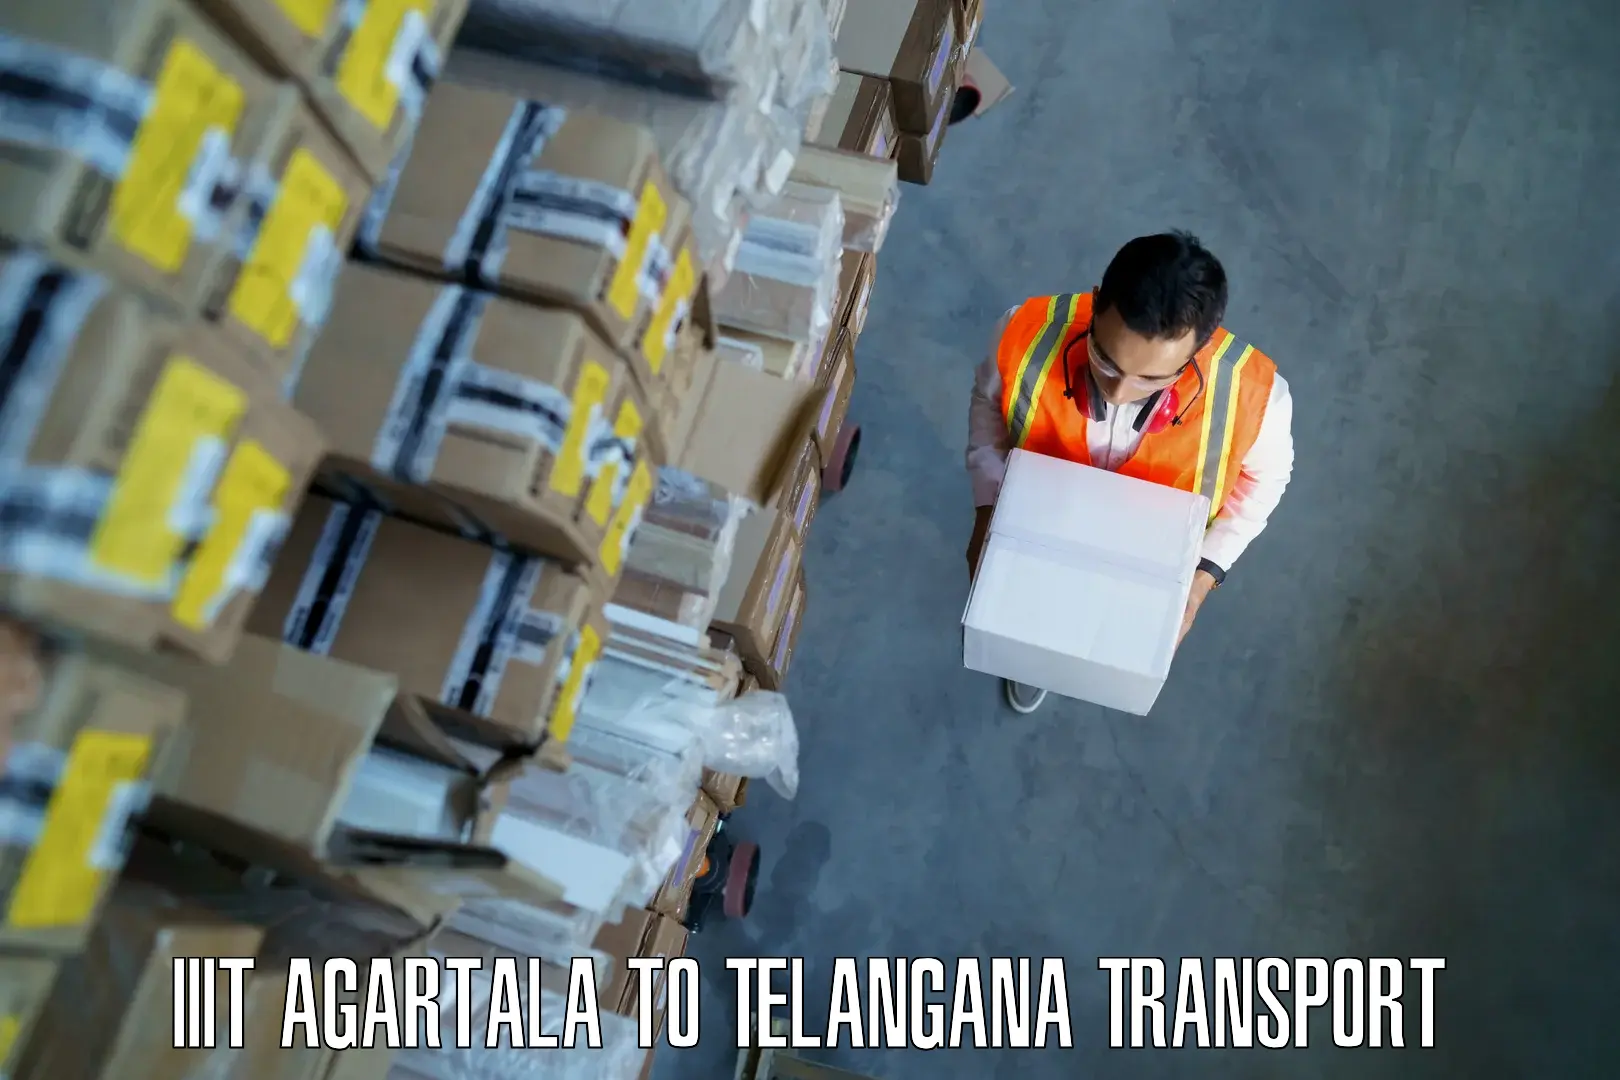 Goods delivery service in IIIT Agartala to Manneguda